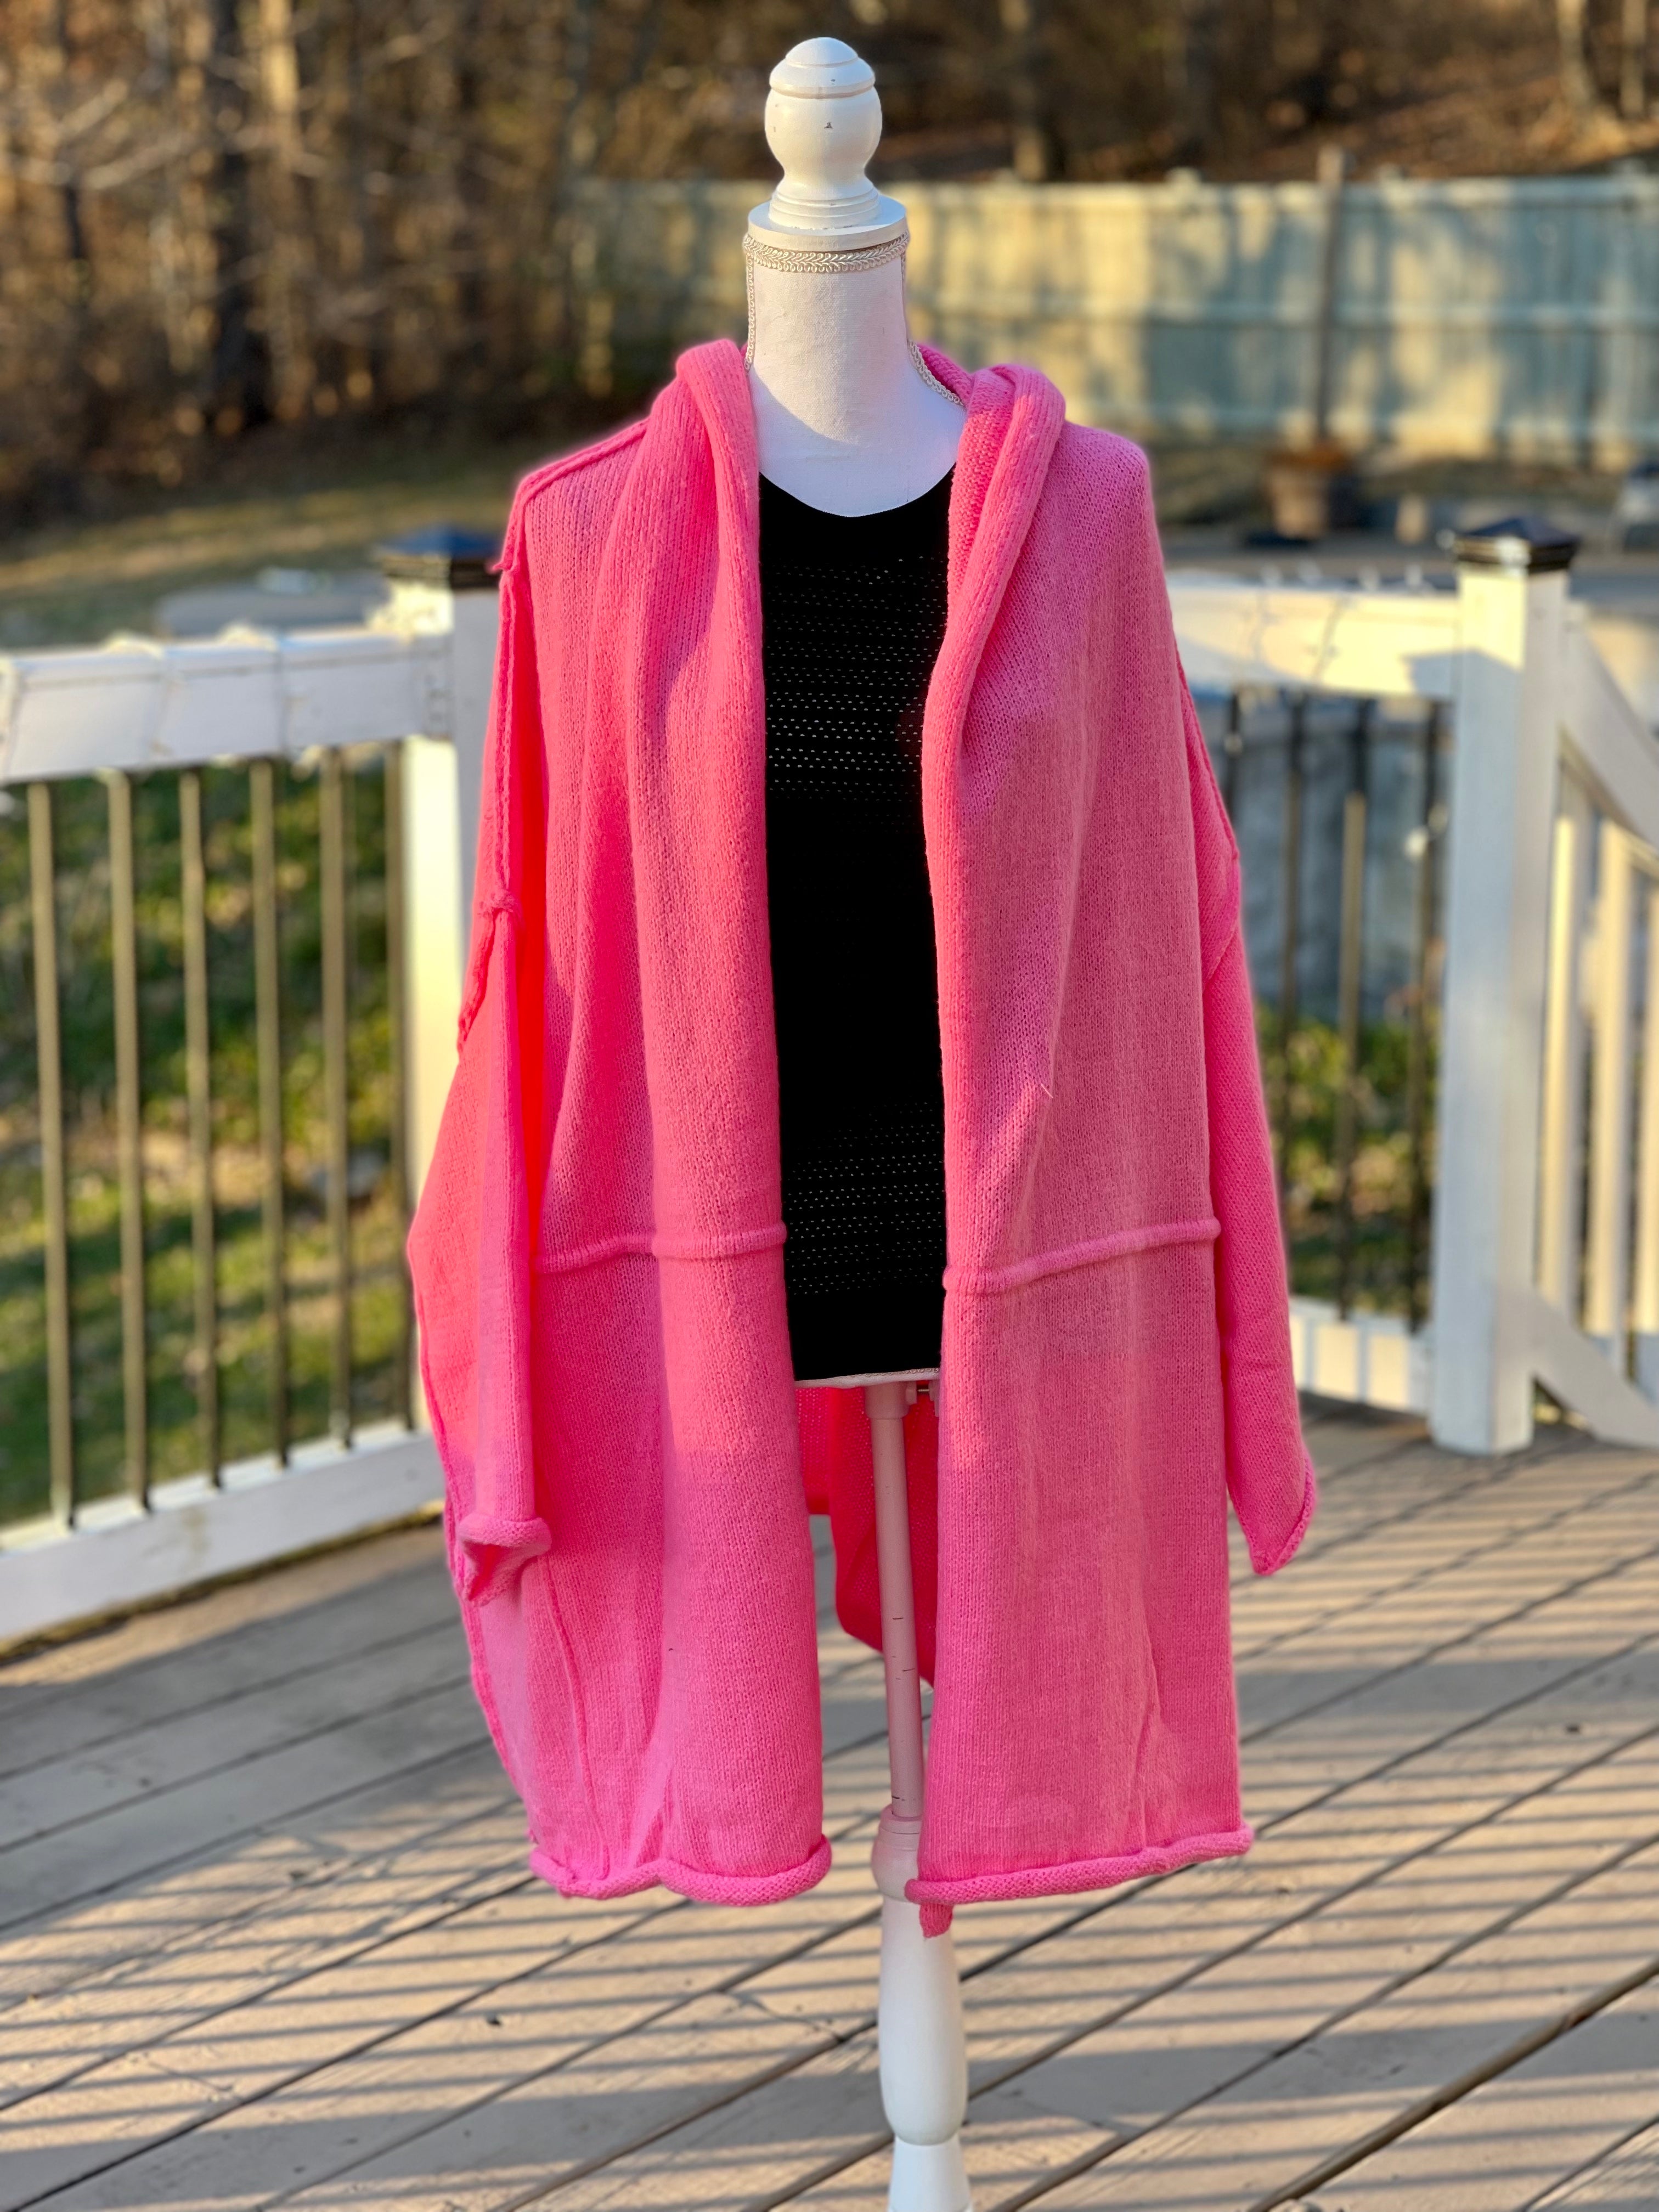 Hot Pink Flowing Cardigan Sweater